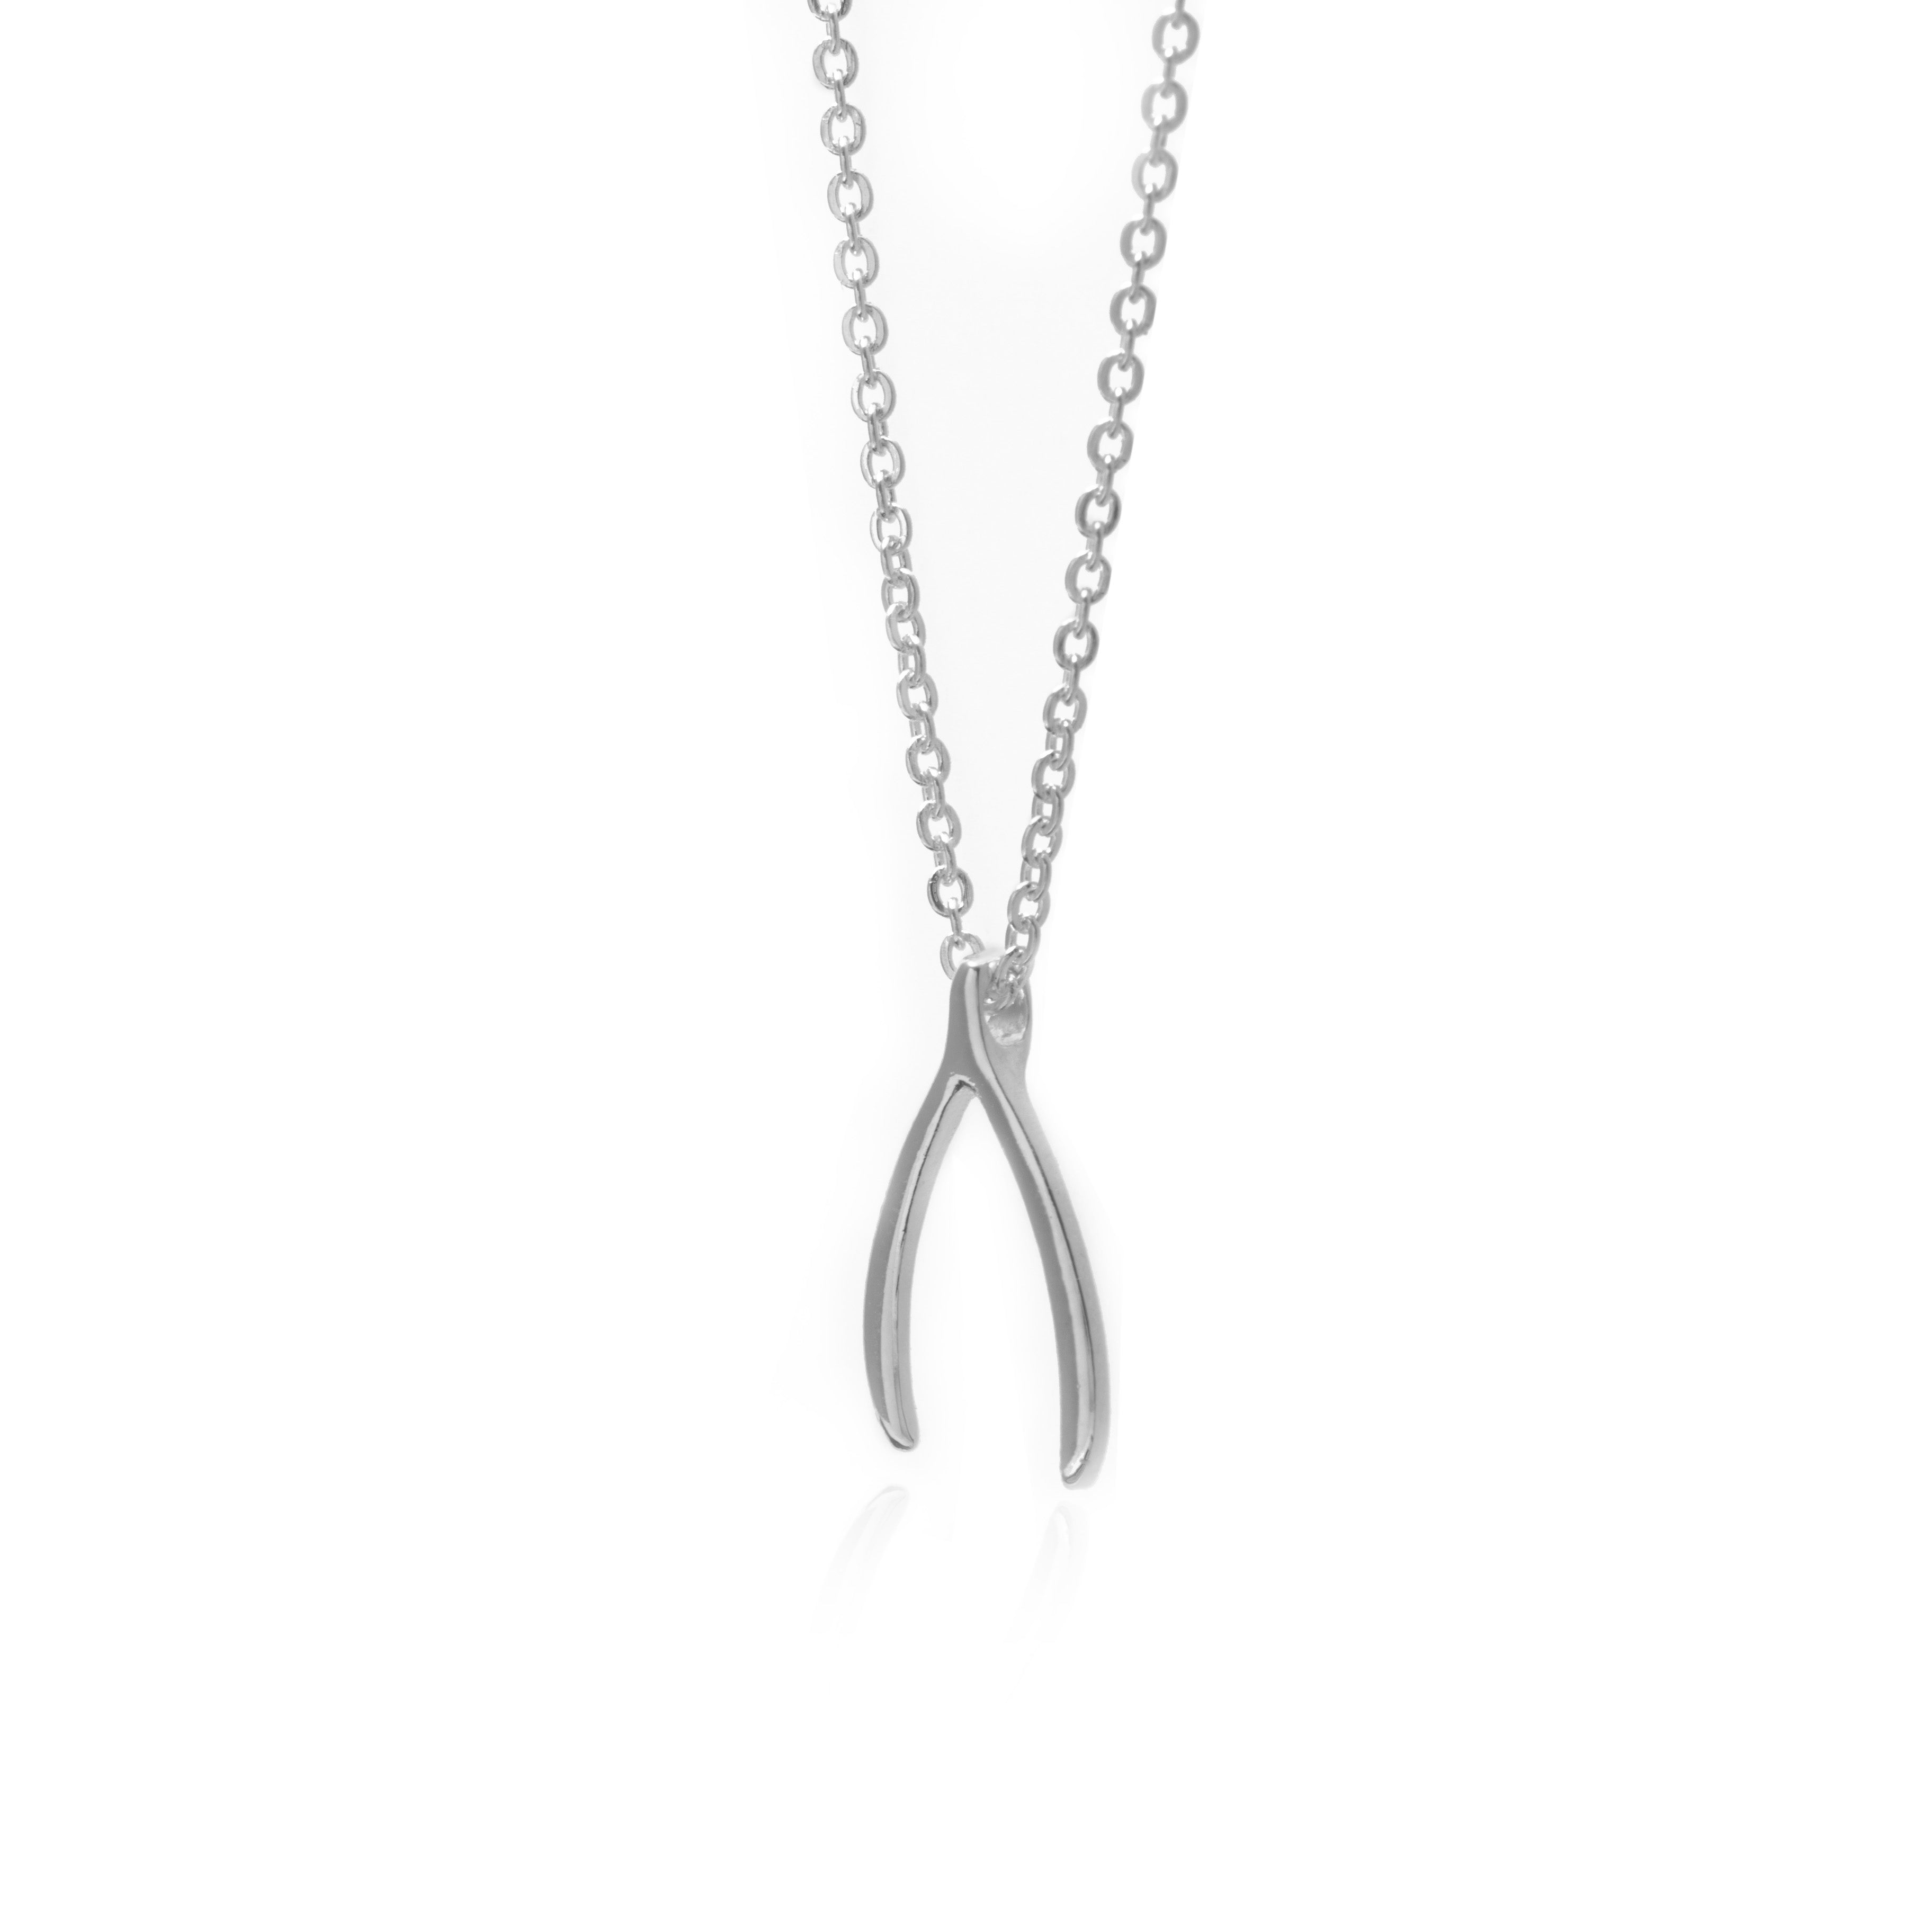 Illariy - Wishbone Necklace Meaning... When you make a wish on a wishbone,  the wisher who breaks the bone and has the larger piece is thought to have  their wish granted. The